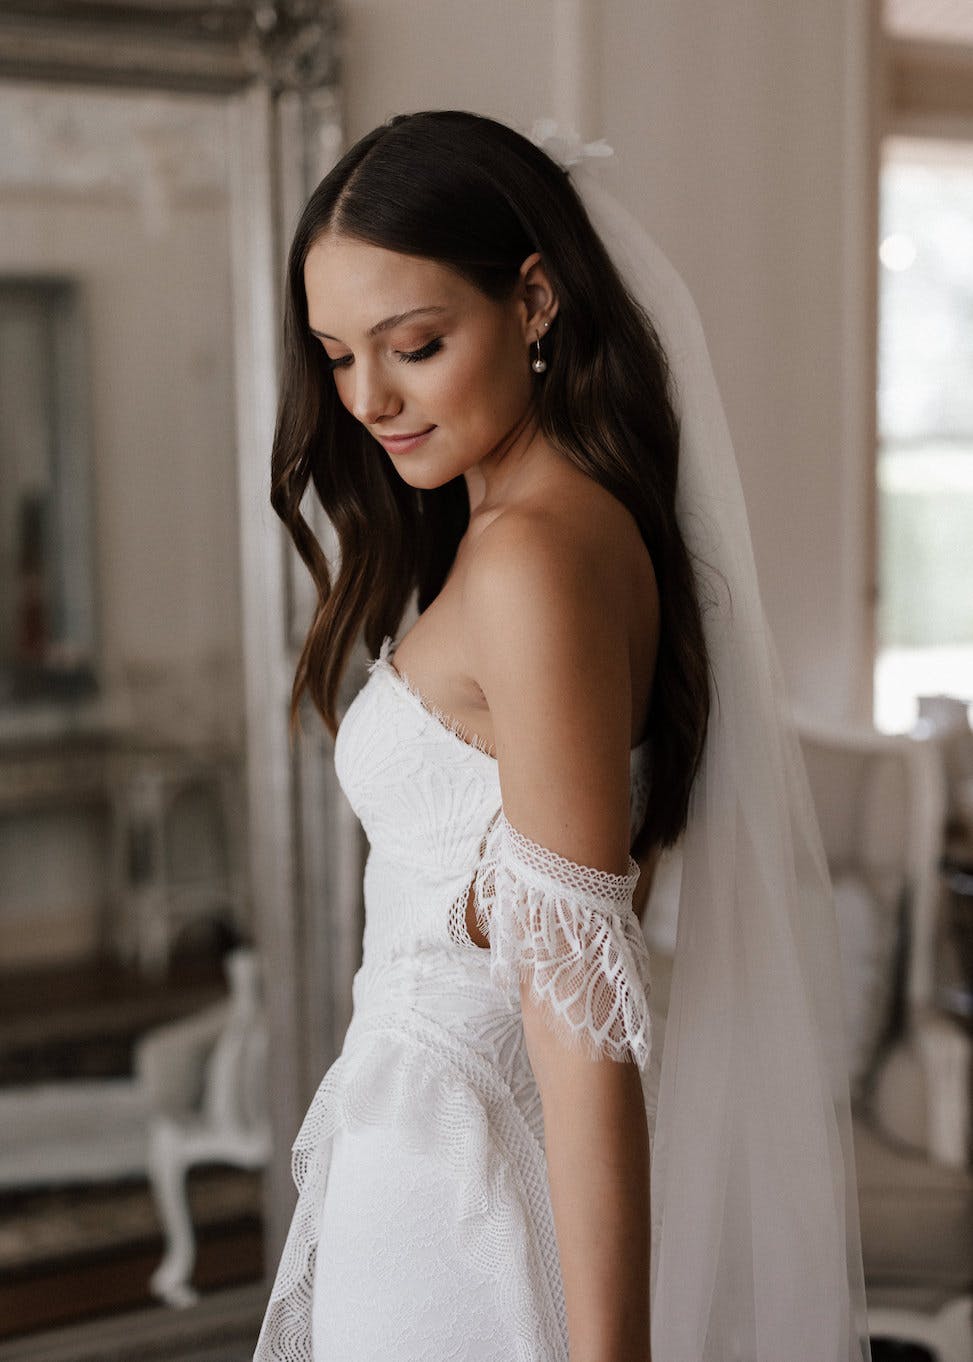 A bride with long dark hair stands in a softly lit room, wearing an elegant, off-shoulder lace wedding dress and a veil cascading down her back. She looks down with a serene expression, showing off her delicate pearl earrings.